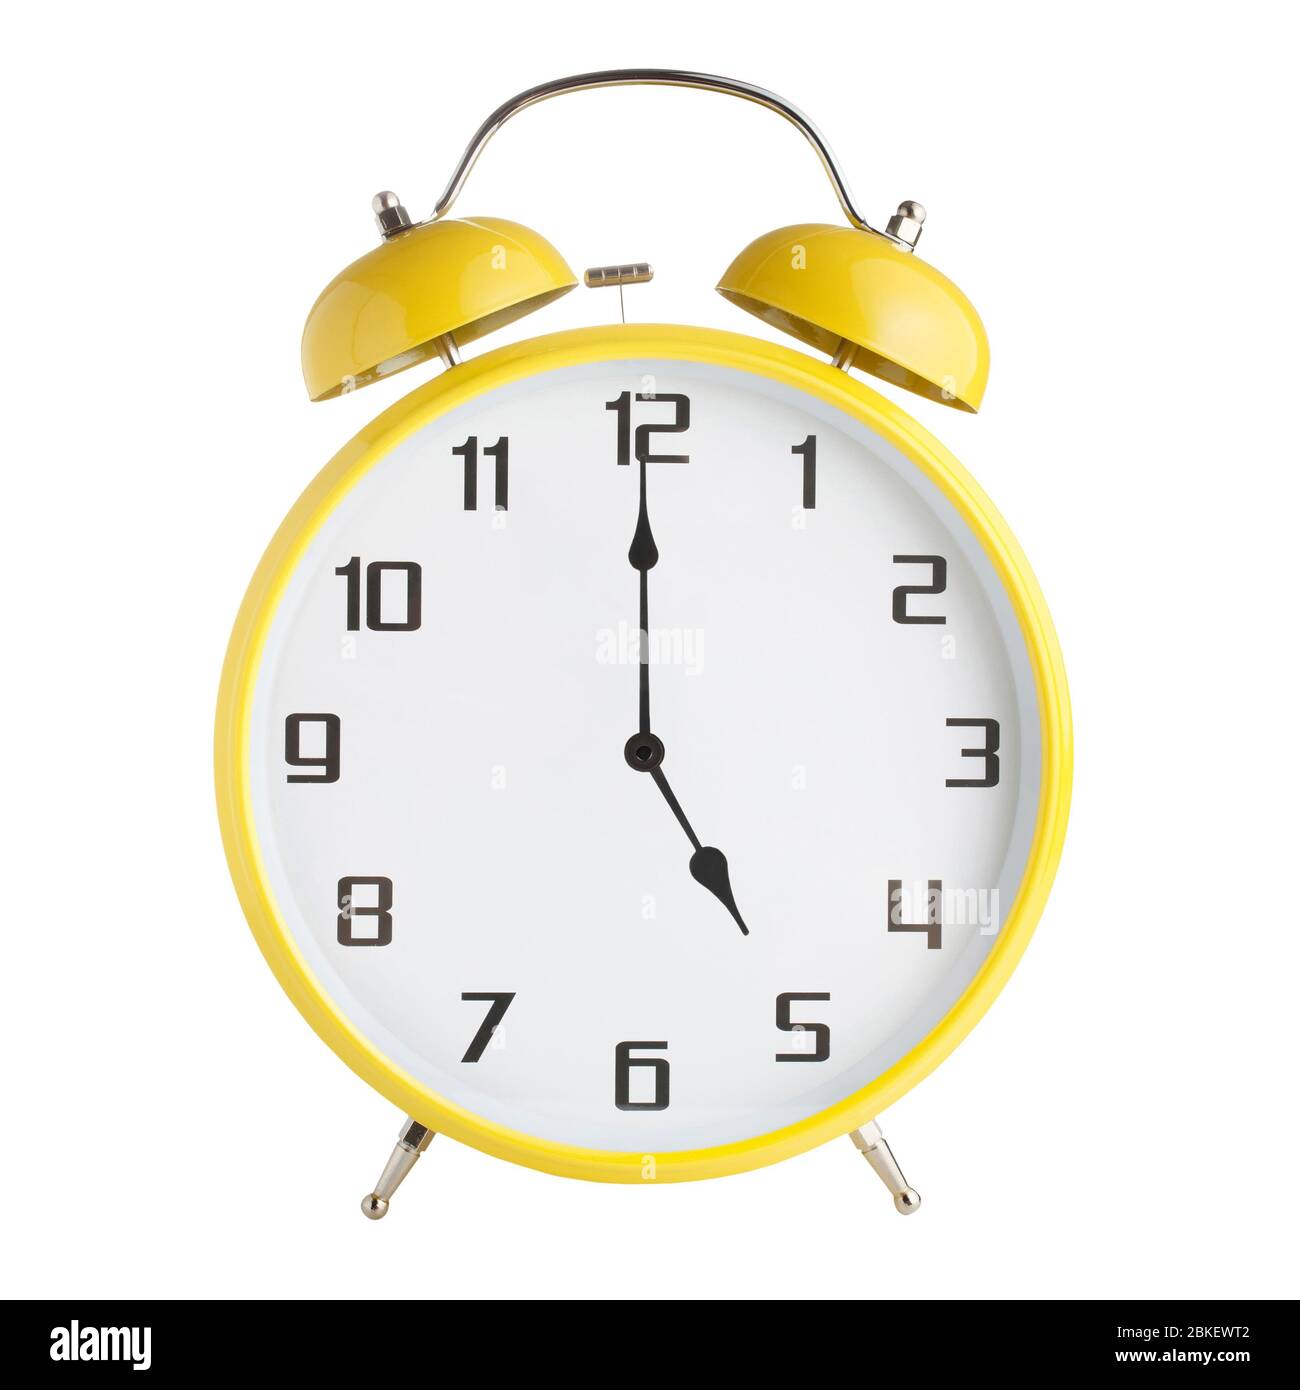 5pm alarm clock Cut Out Stock Images & Pictures - Alamy